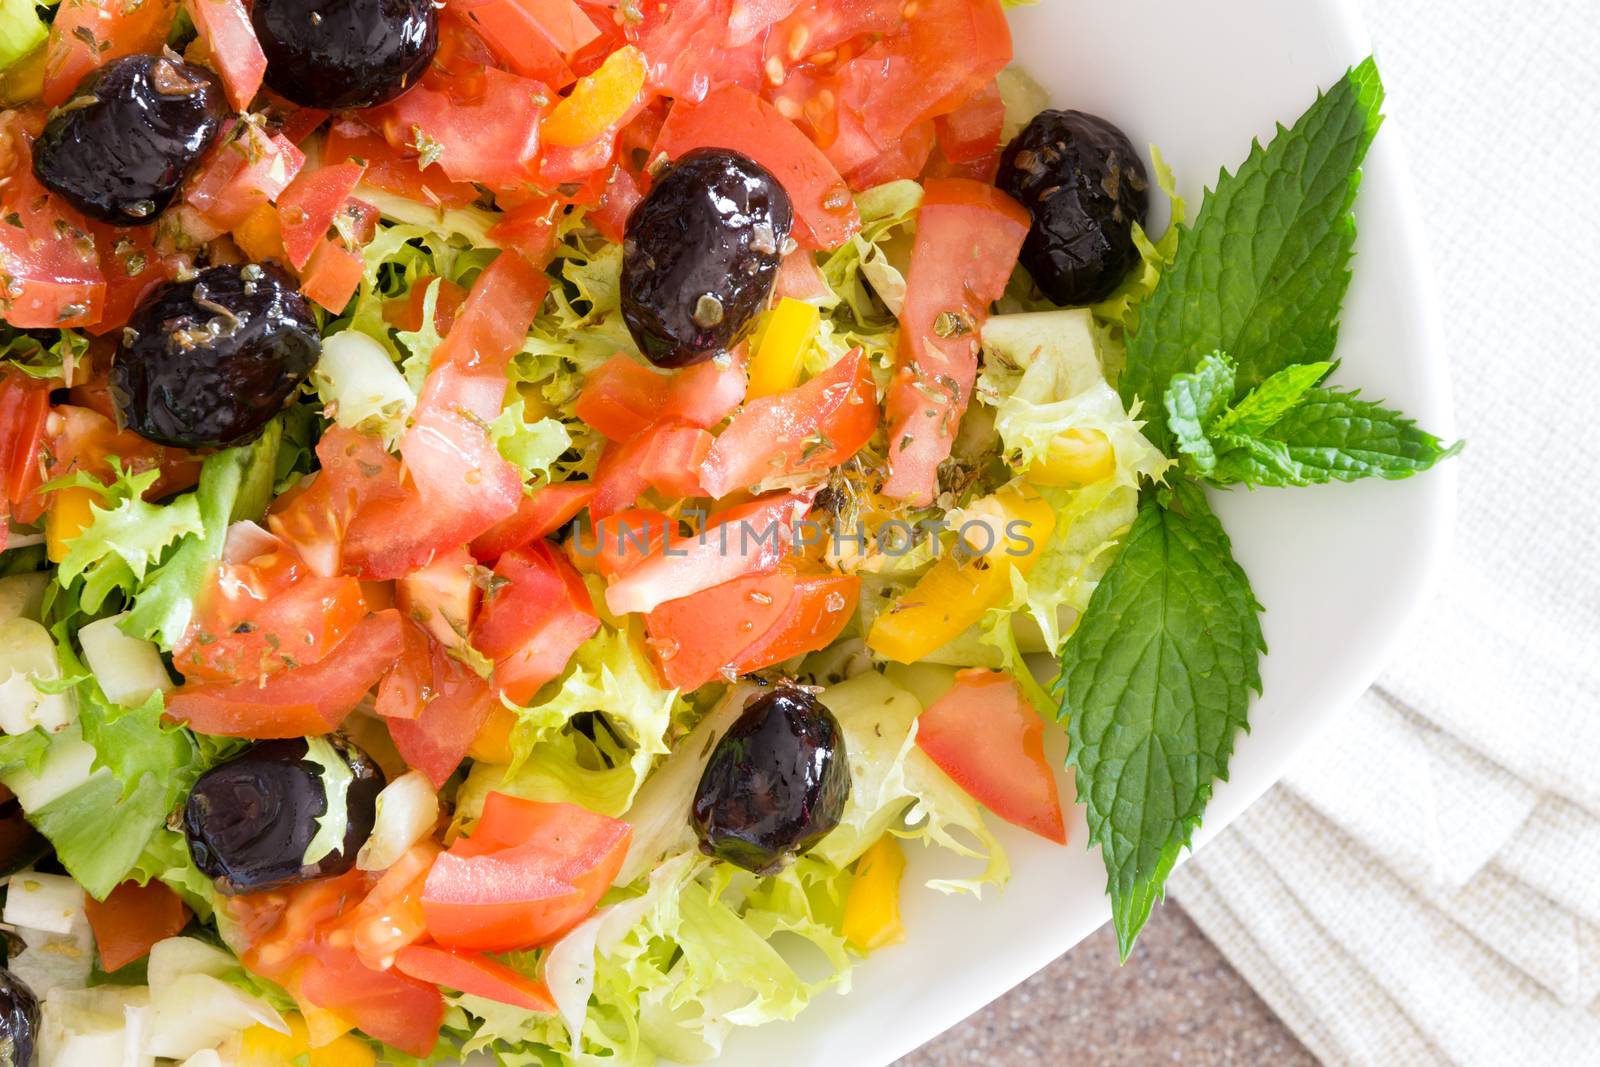 Healthy farm fresh Mediterranean salad with black olives, lettuce, tomato and sweet bell peppers garnished with sprigs of mint for flavoring, close up detail